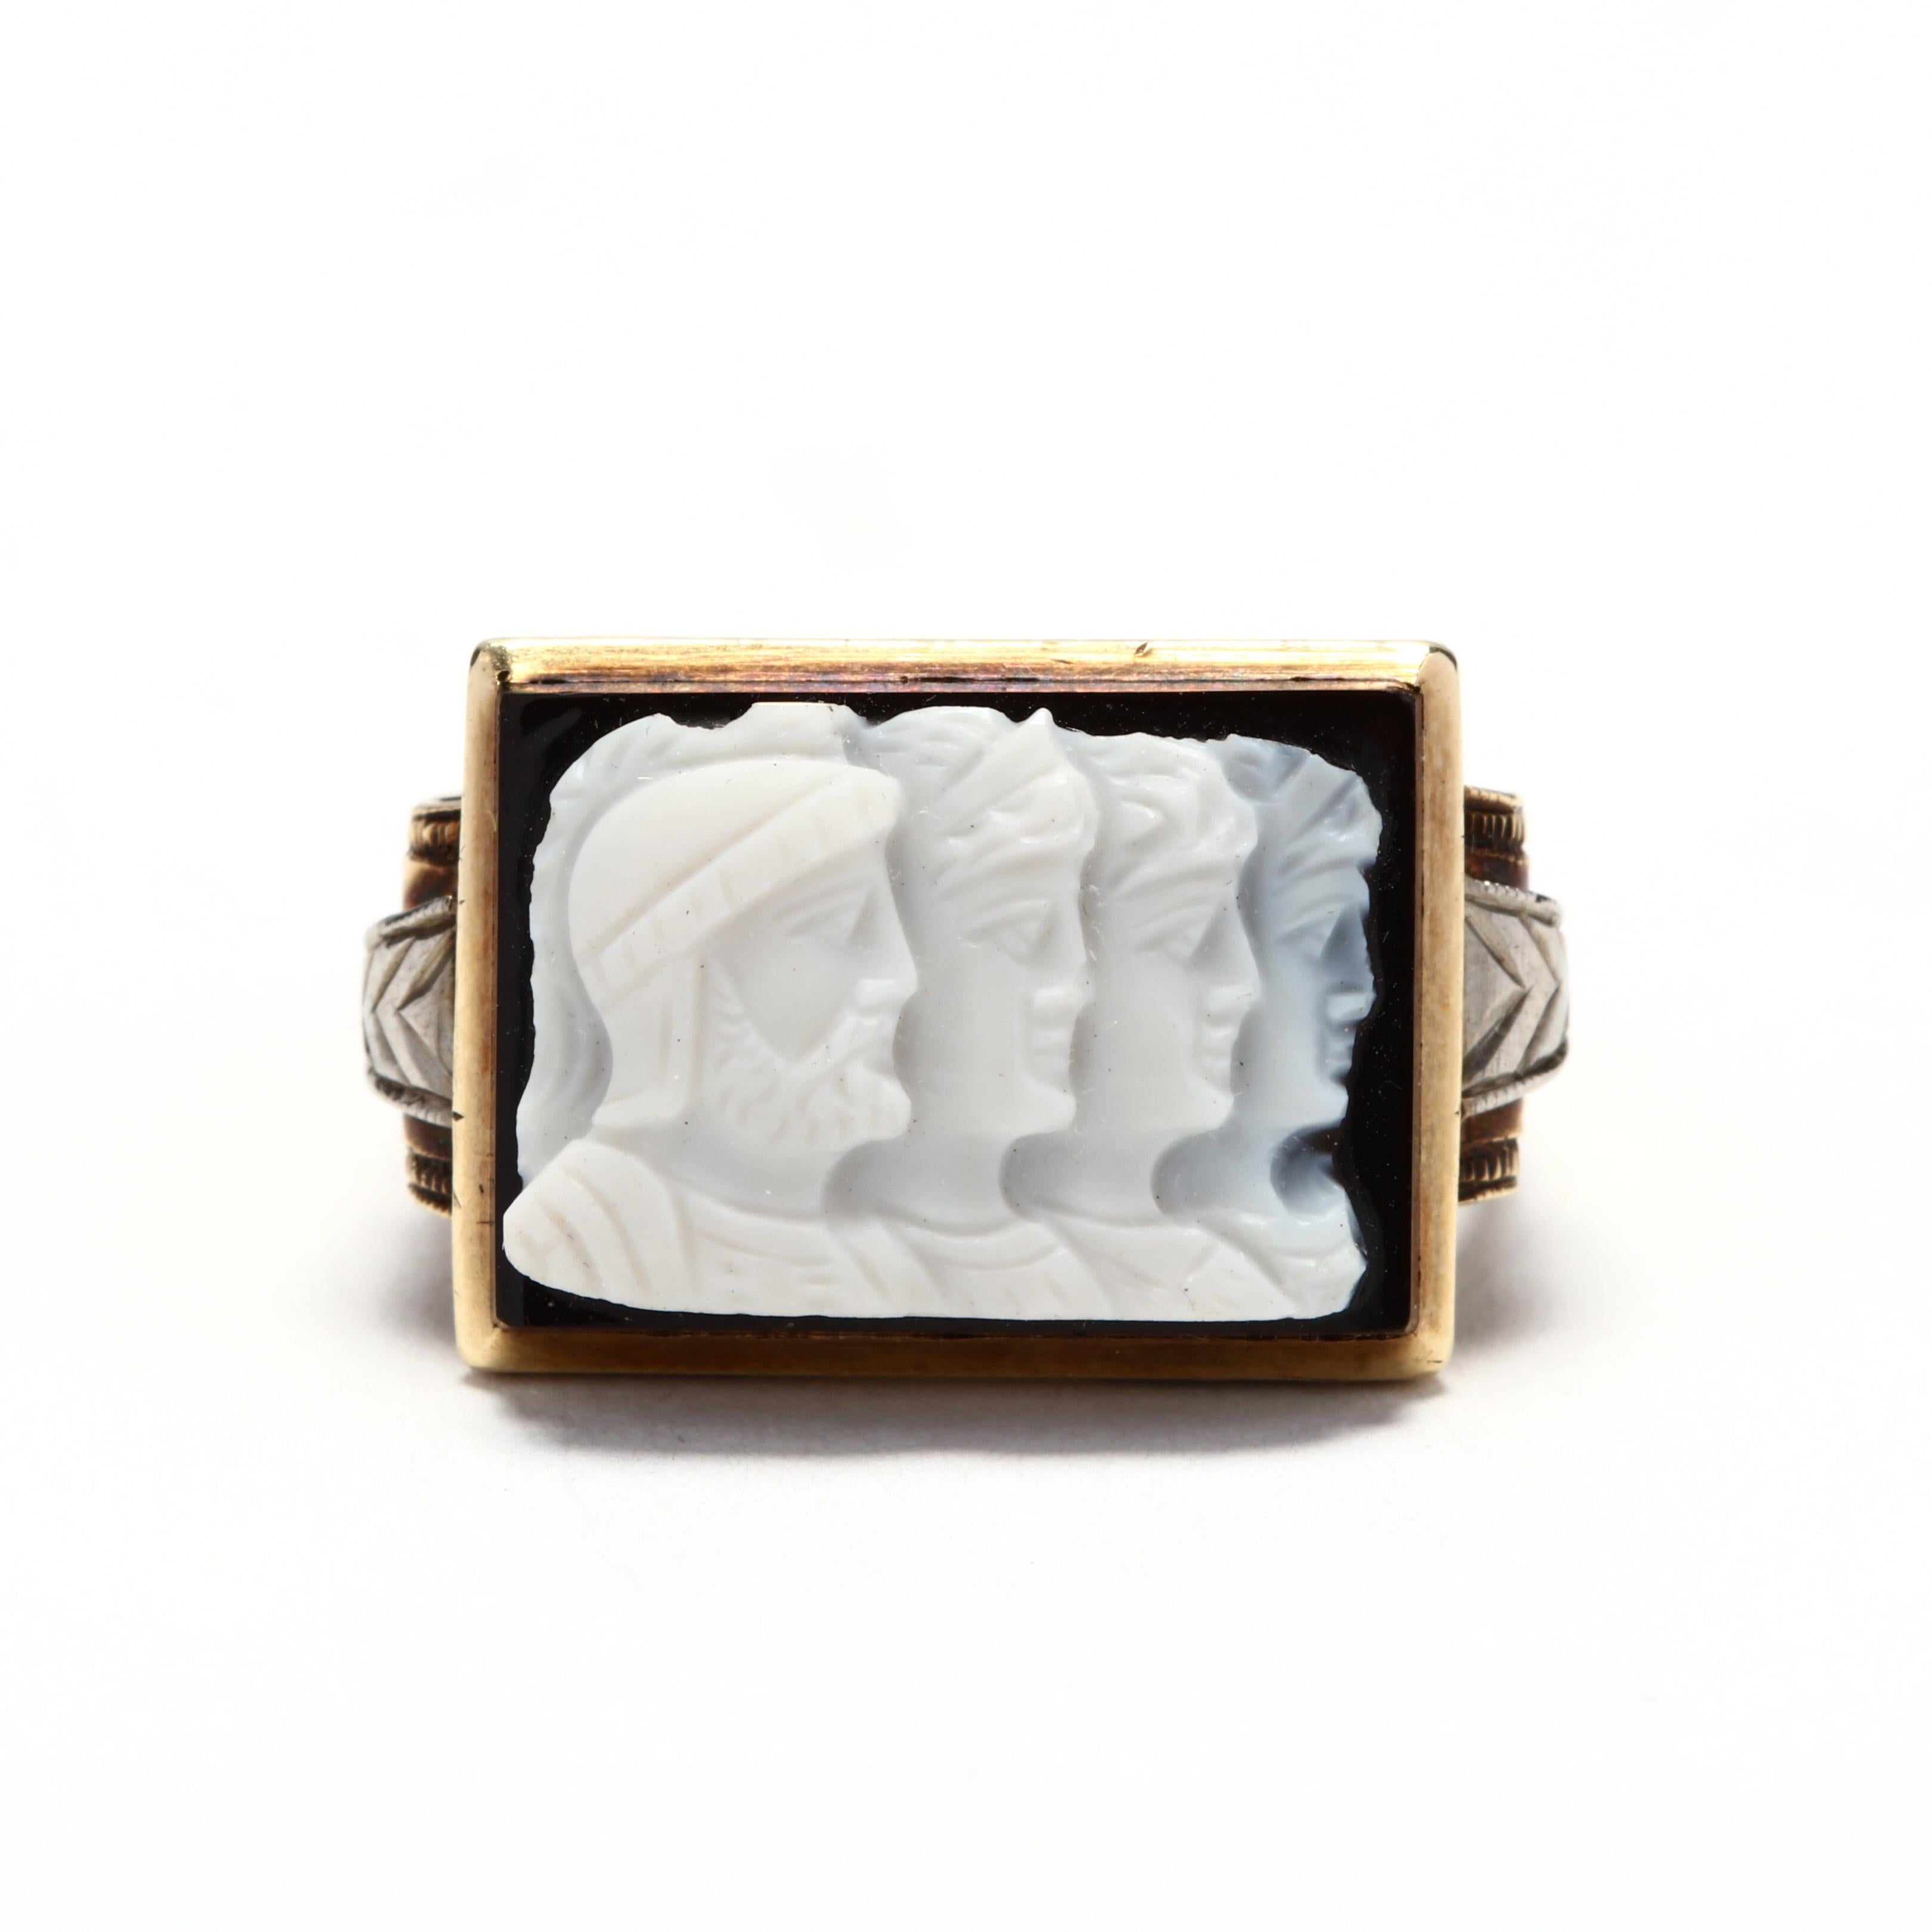 1940's 14 karat yellow and white gold sardonyx Roman soldier cameo ring. A rectangular, carved sardonyx cameo stone depicting the profiles of four Roman soldiers set in an engraved, rolled shoulder mounting.

Stones:
- sardonyx, 1 stone
-